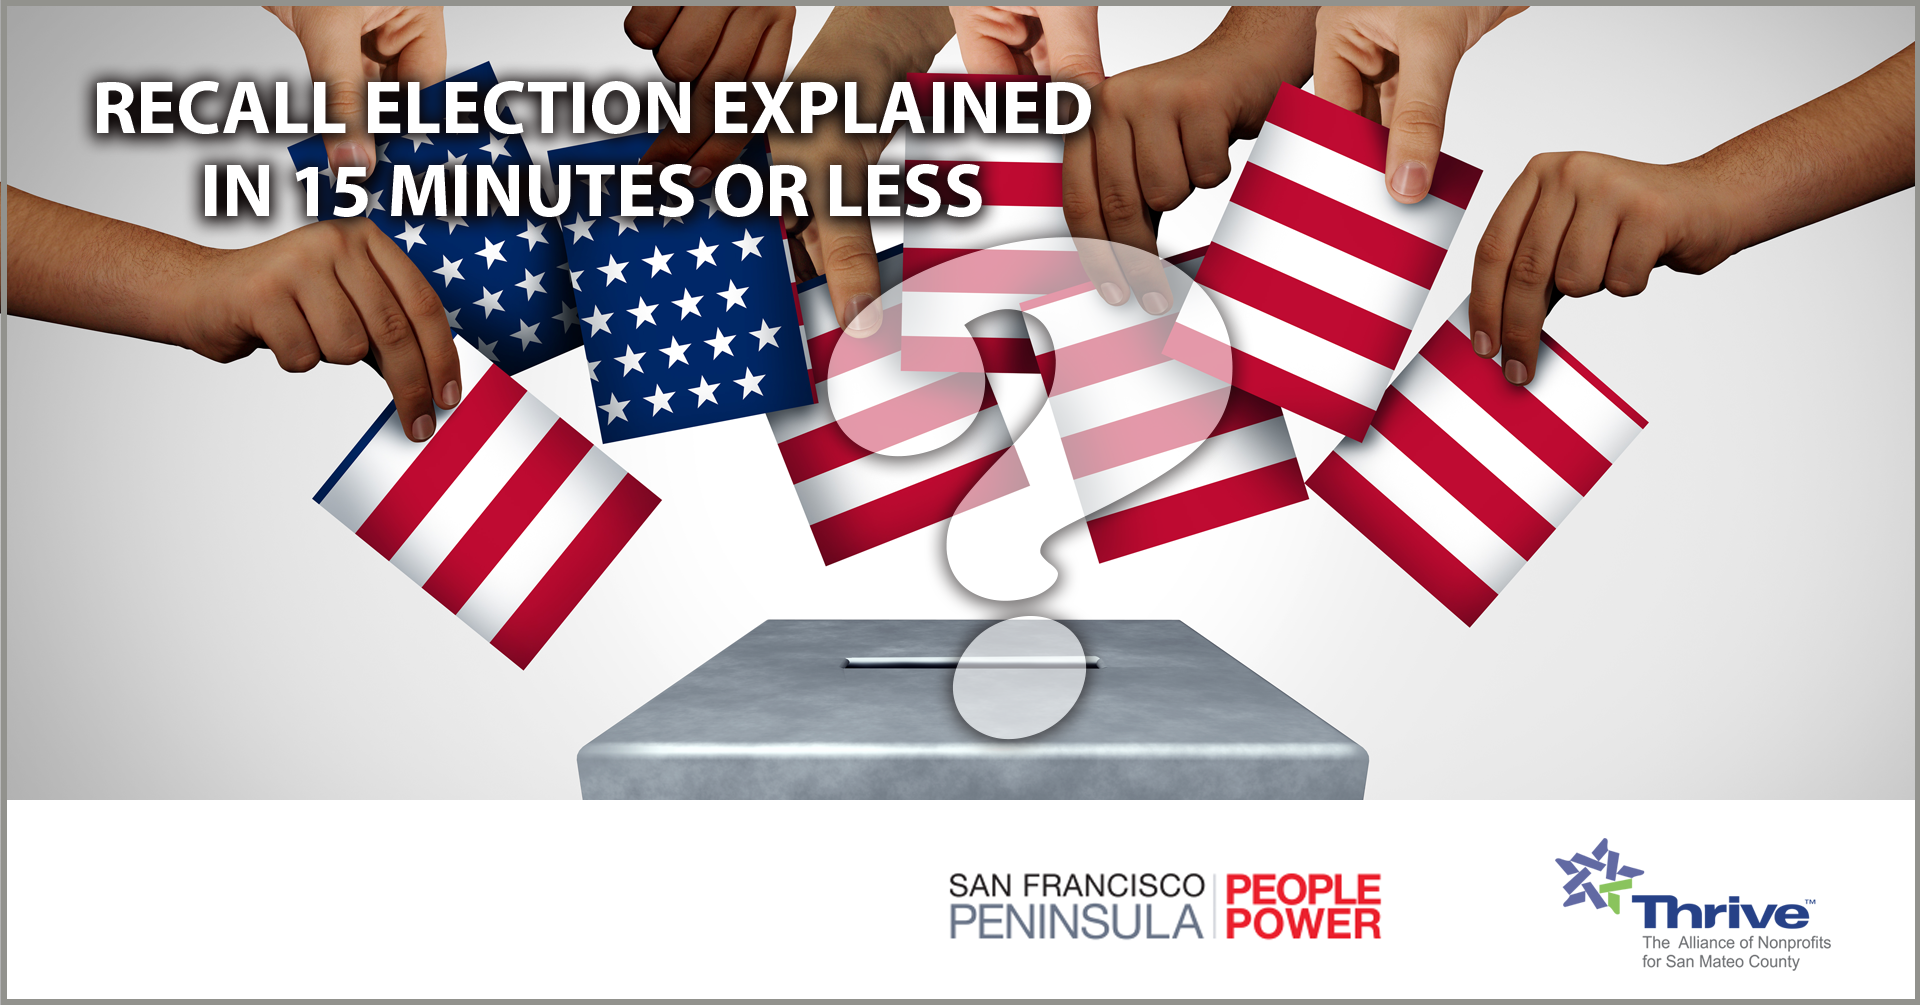 Recall Election Explained in 15 Minutes or Less